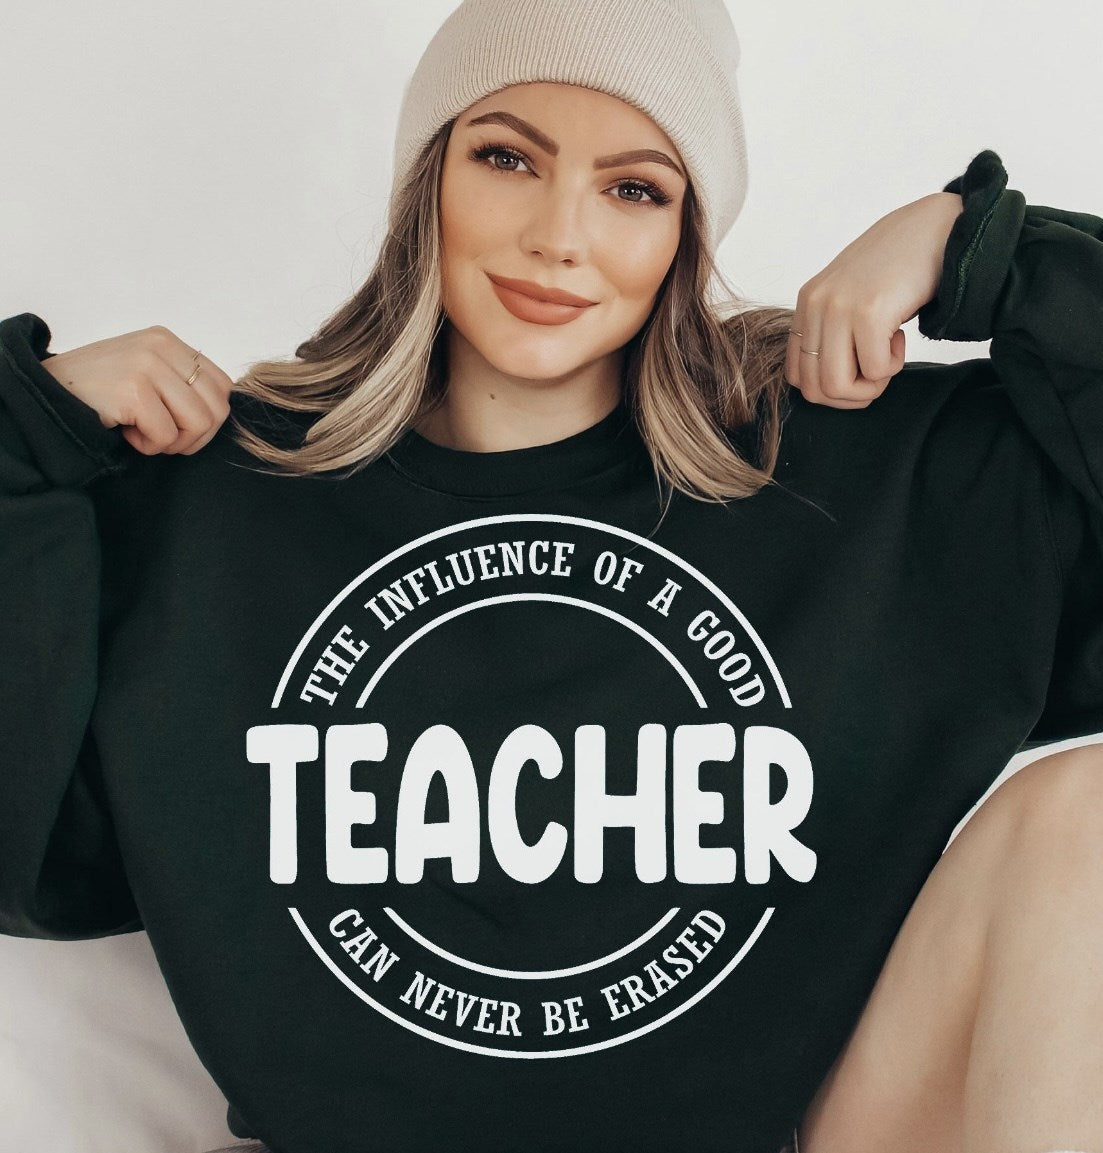 The Influence Of A Good Teacher Can Never Be Erased Crew Sweatshirt